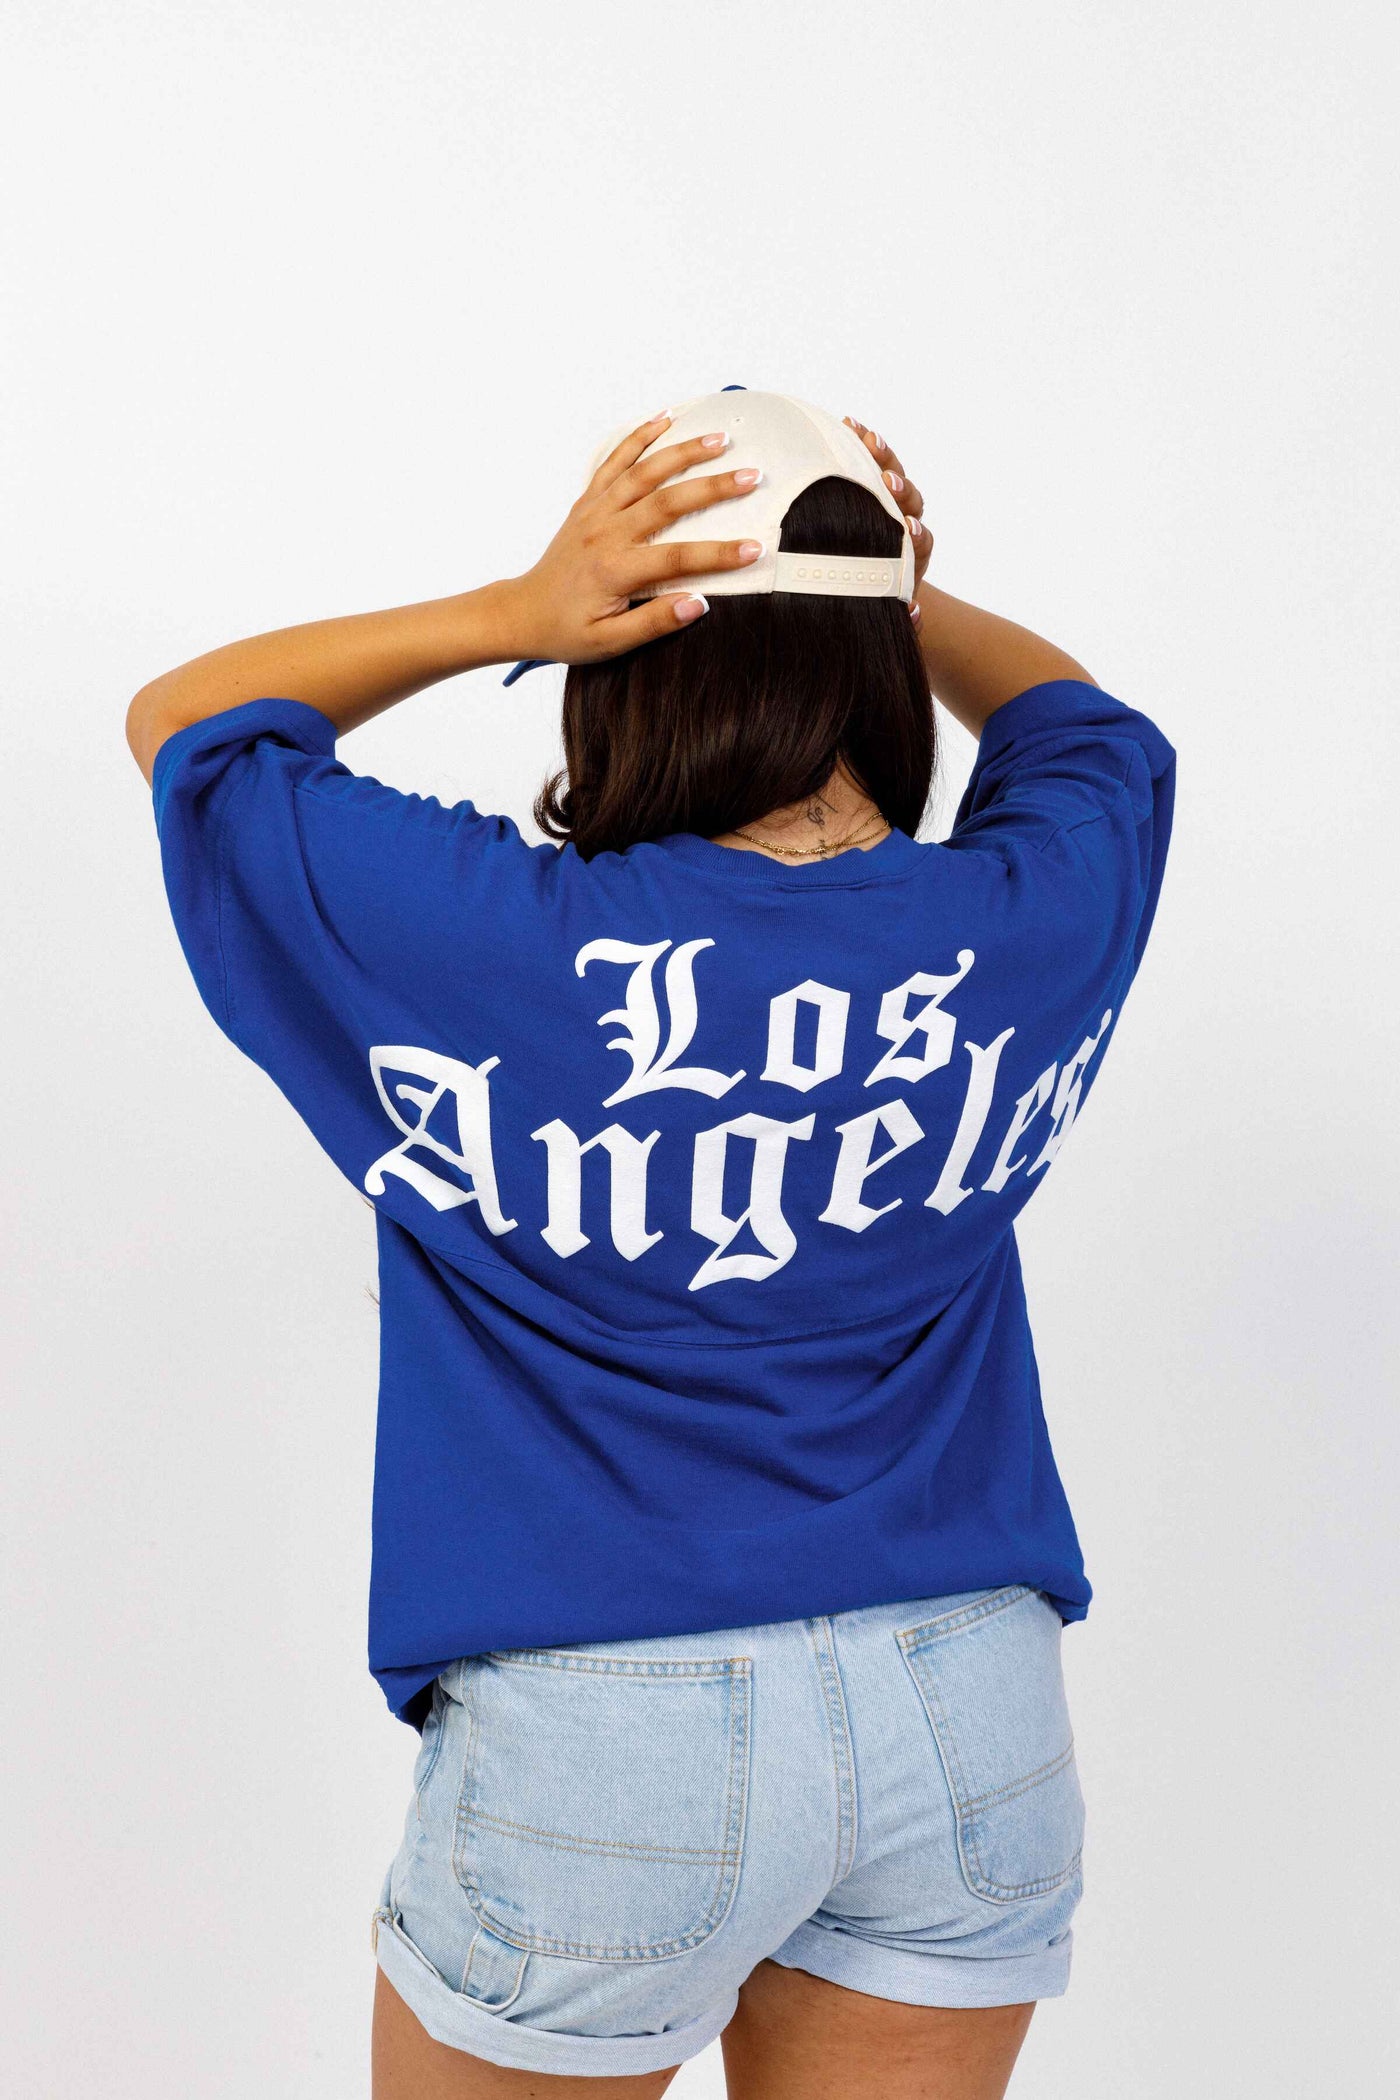 Classic Los Angeles Spirit Jersey in Royal Blue S